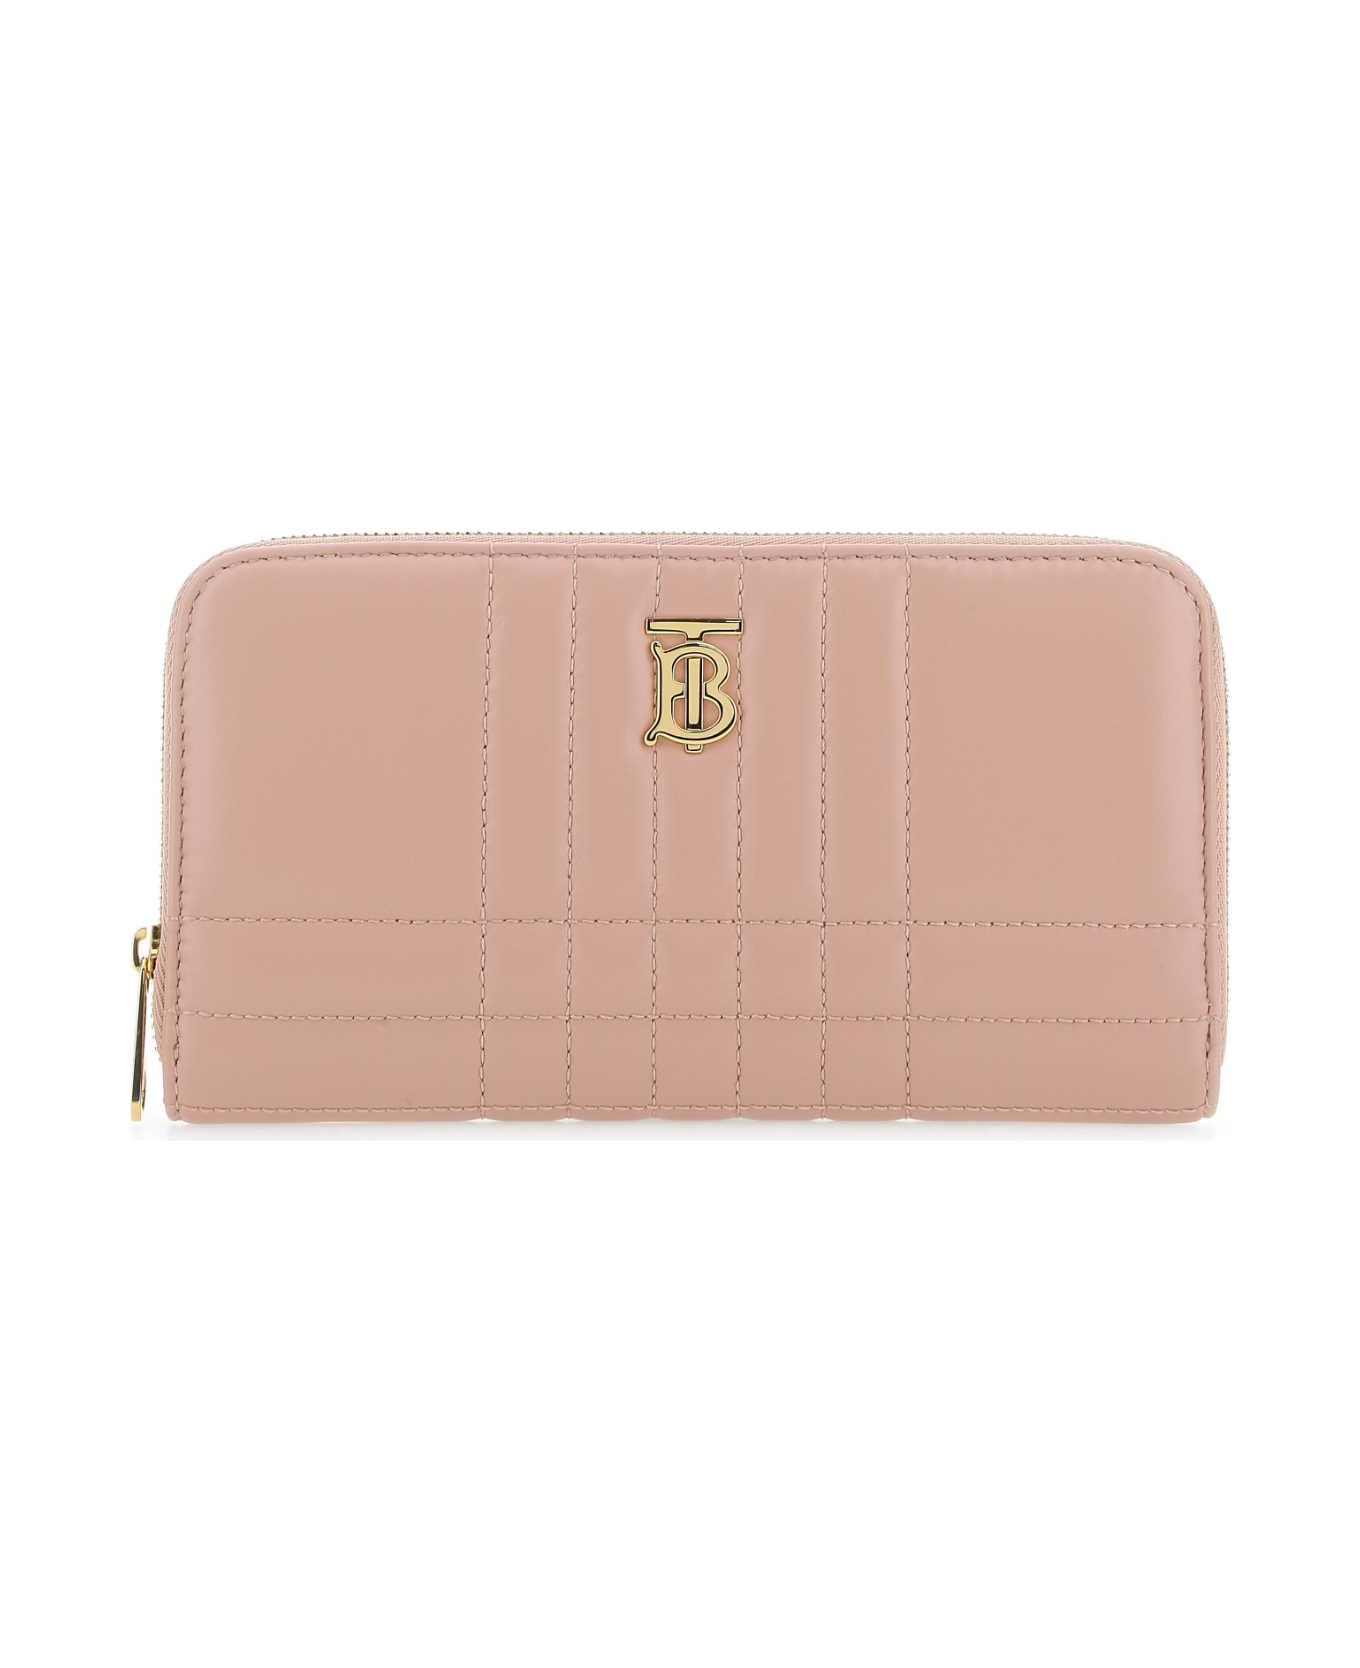 Burberry Pink Nappa Leather Lola Wallet - A3661